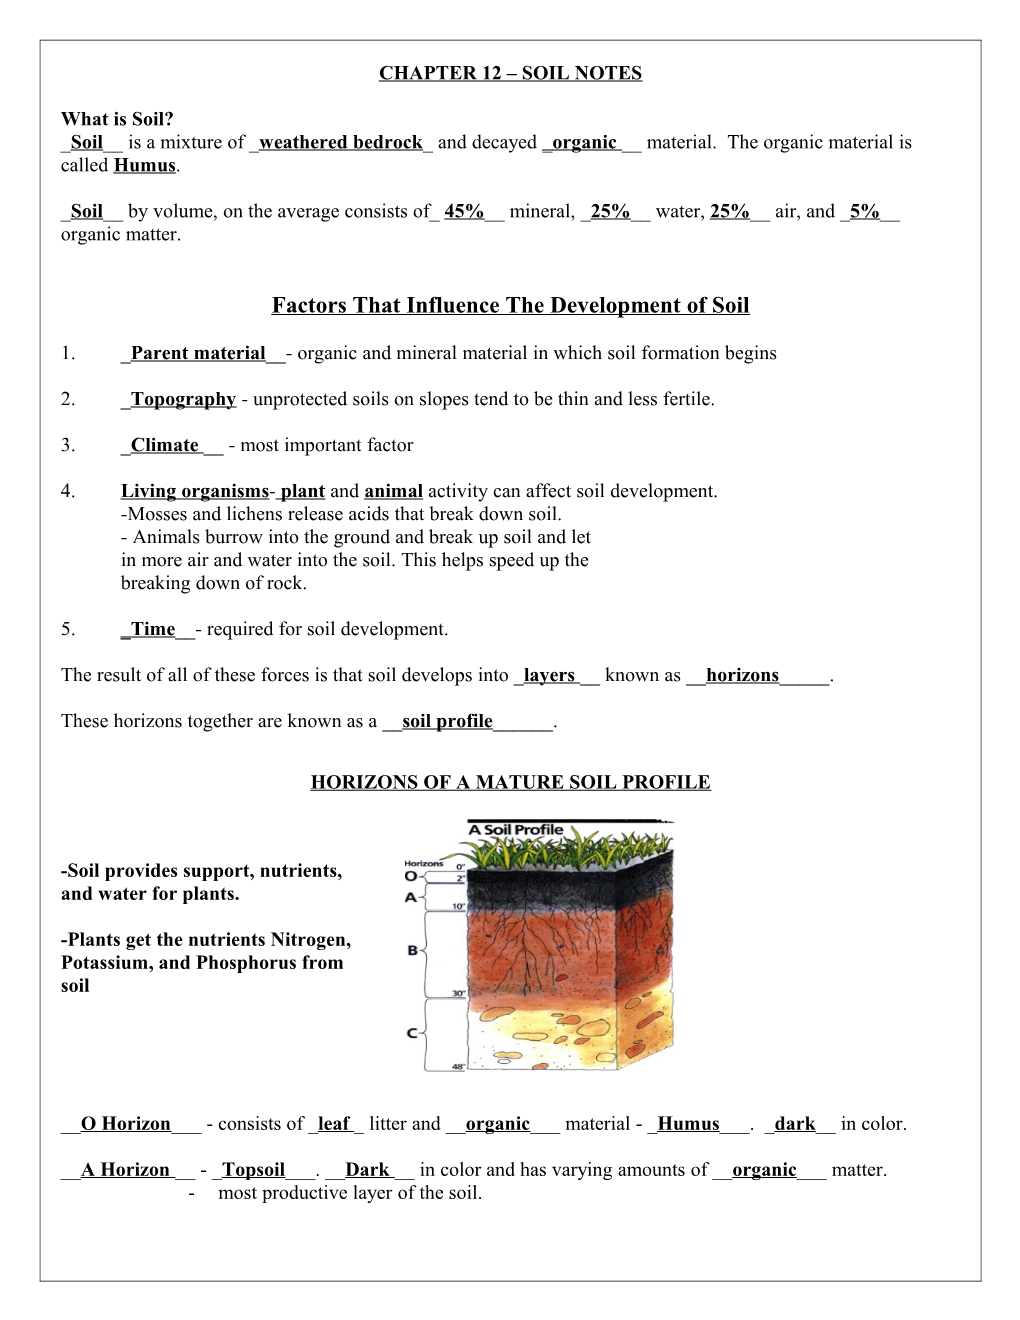 Chapter 12 Soil Notes